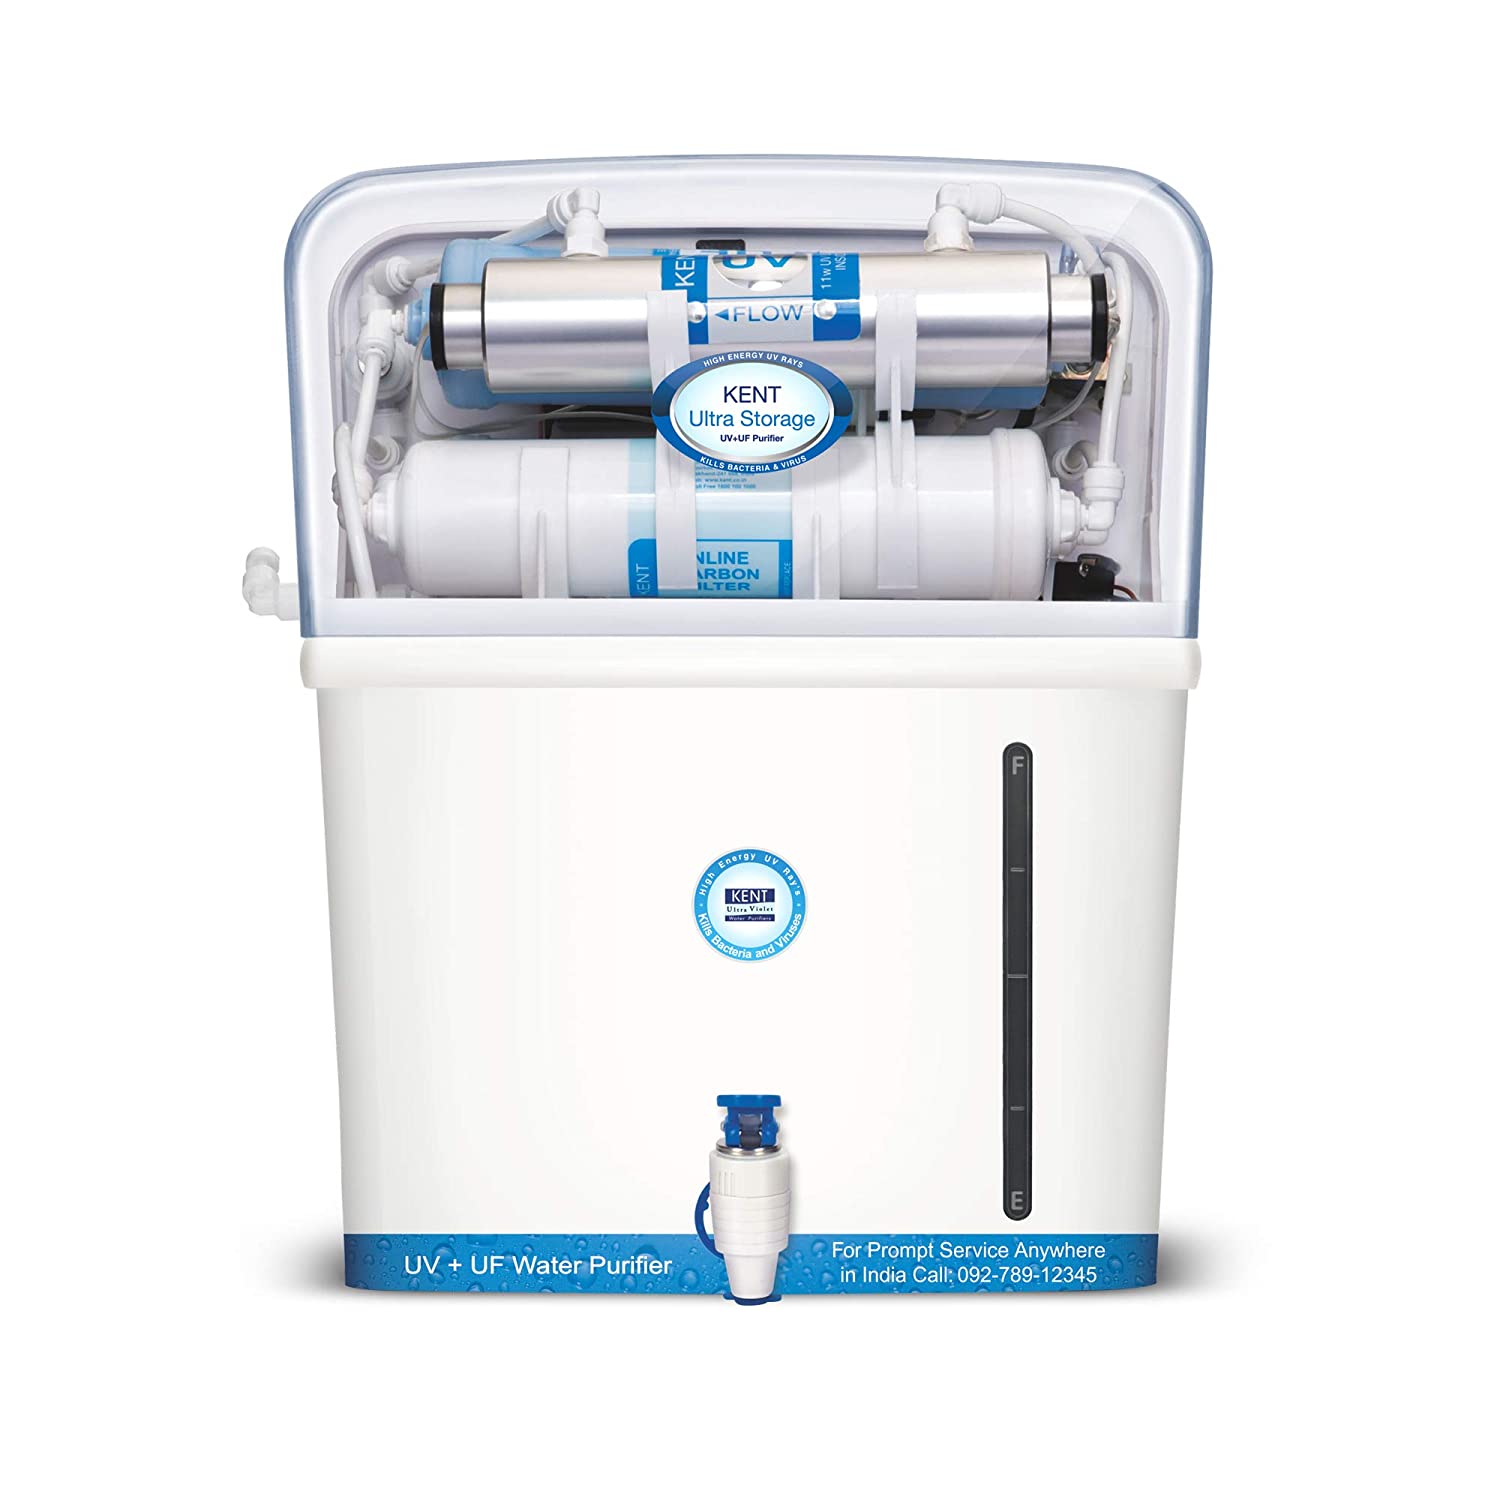 Non RO water purifier in India with UV and UF